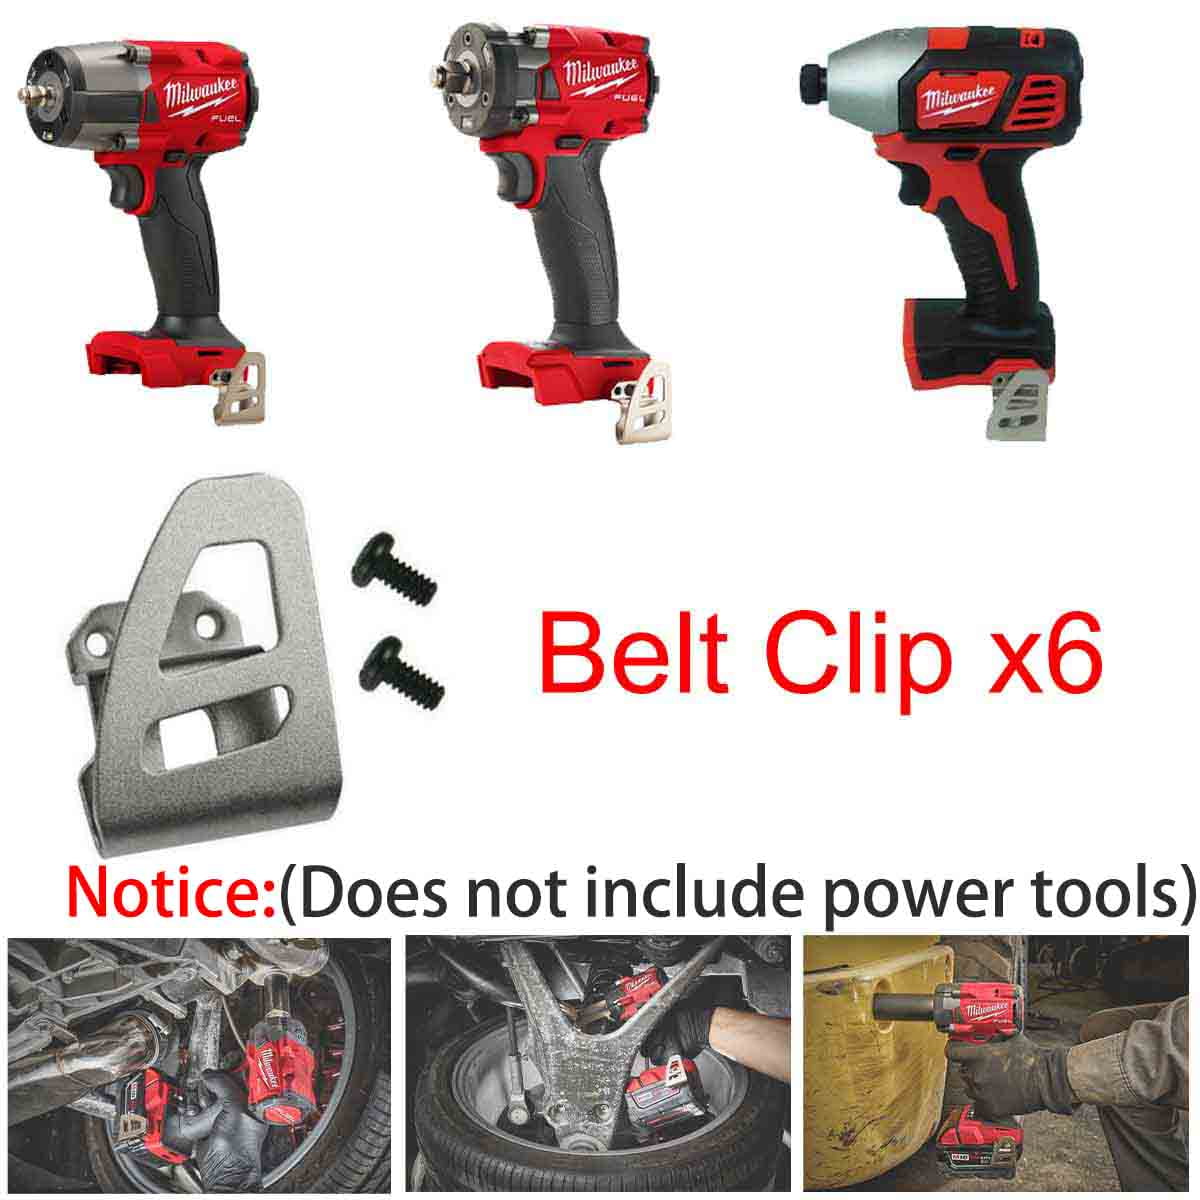 M18 Tool Belt Clip For Milwaukee 2653 M18 Impact Drivers and Drills 